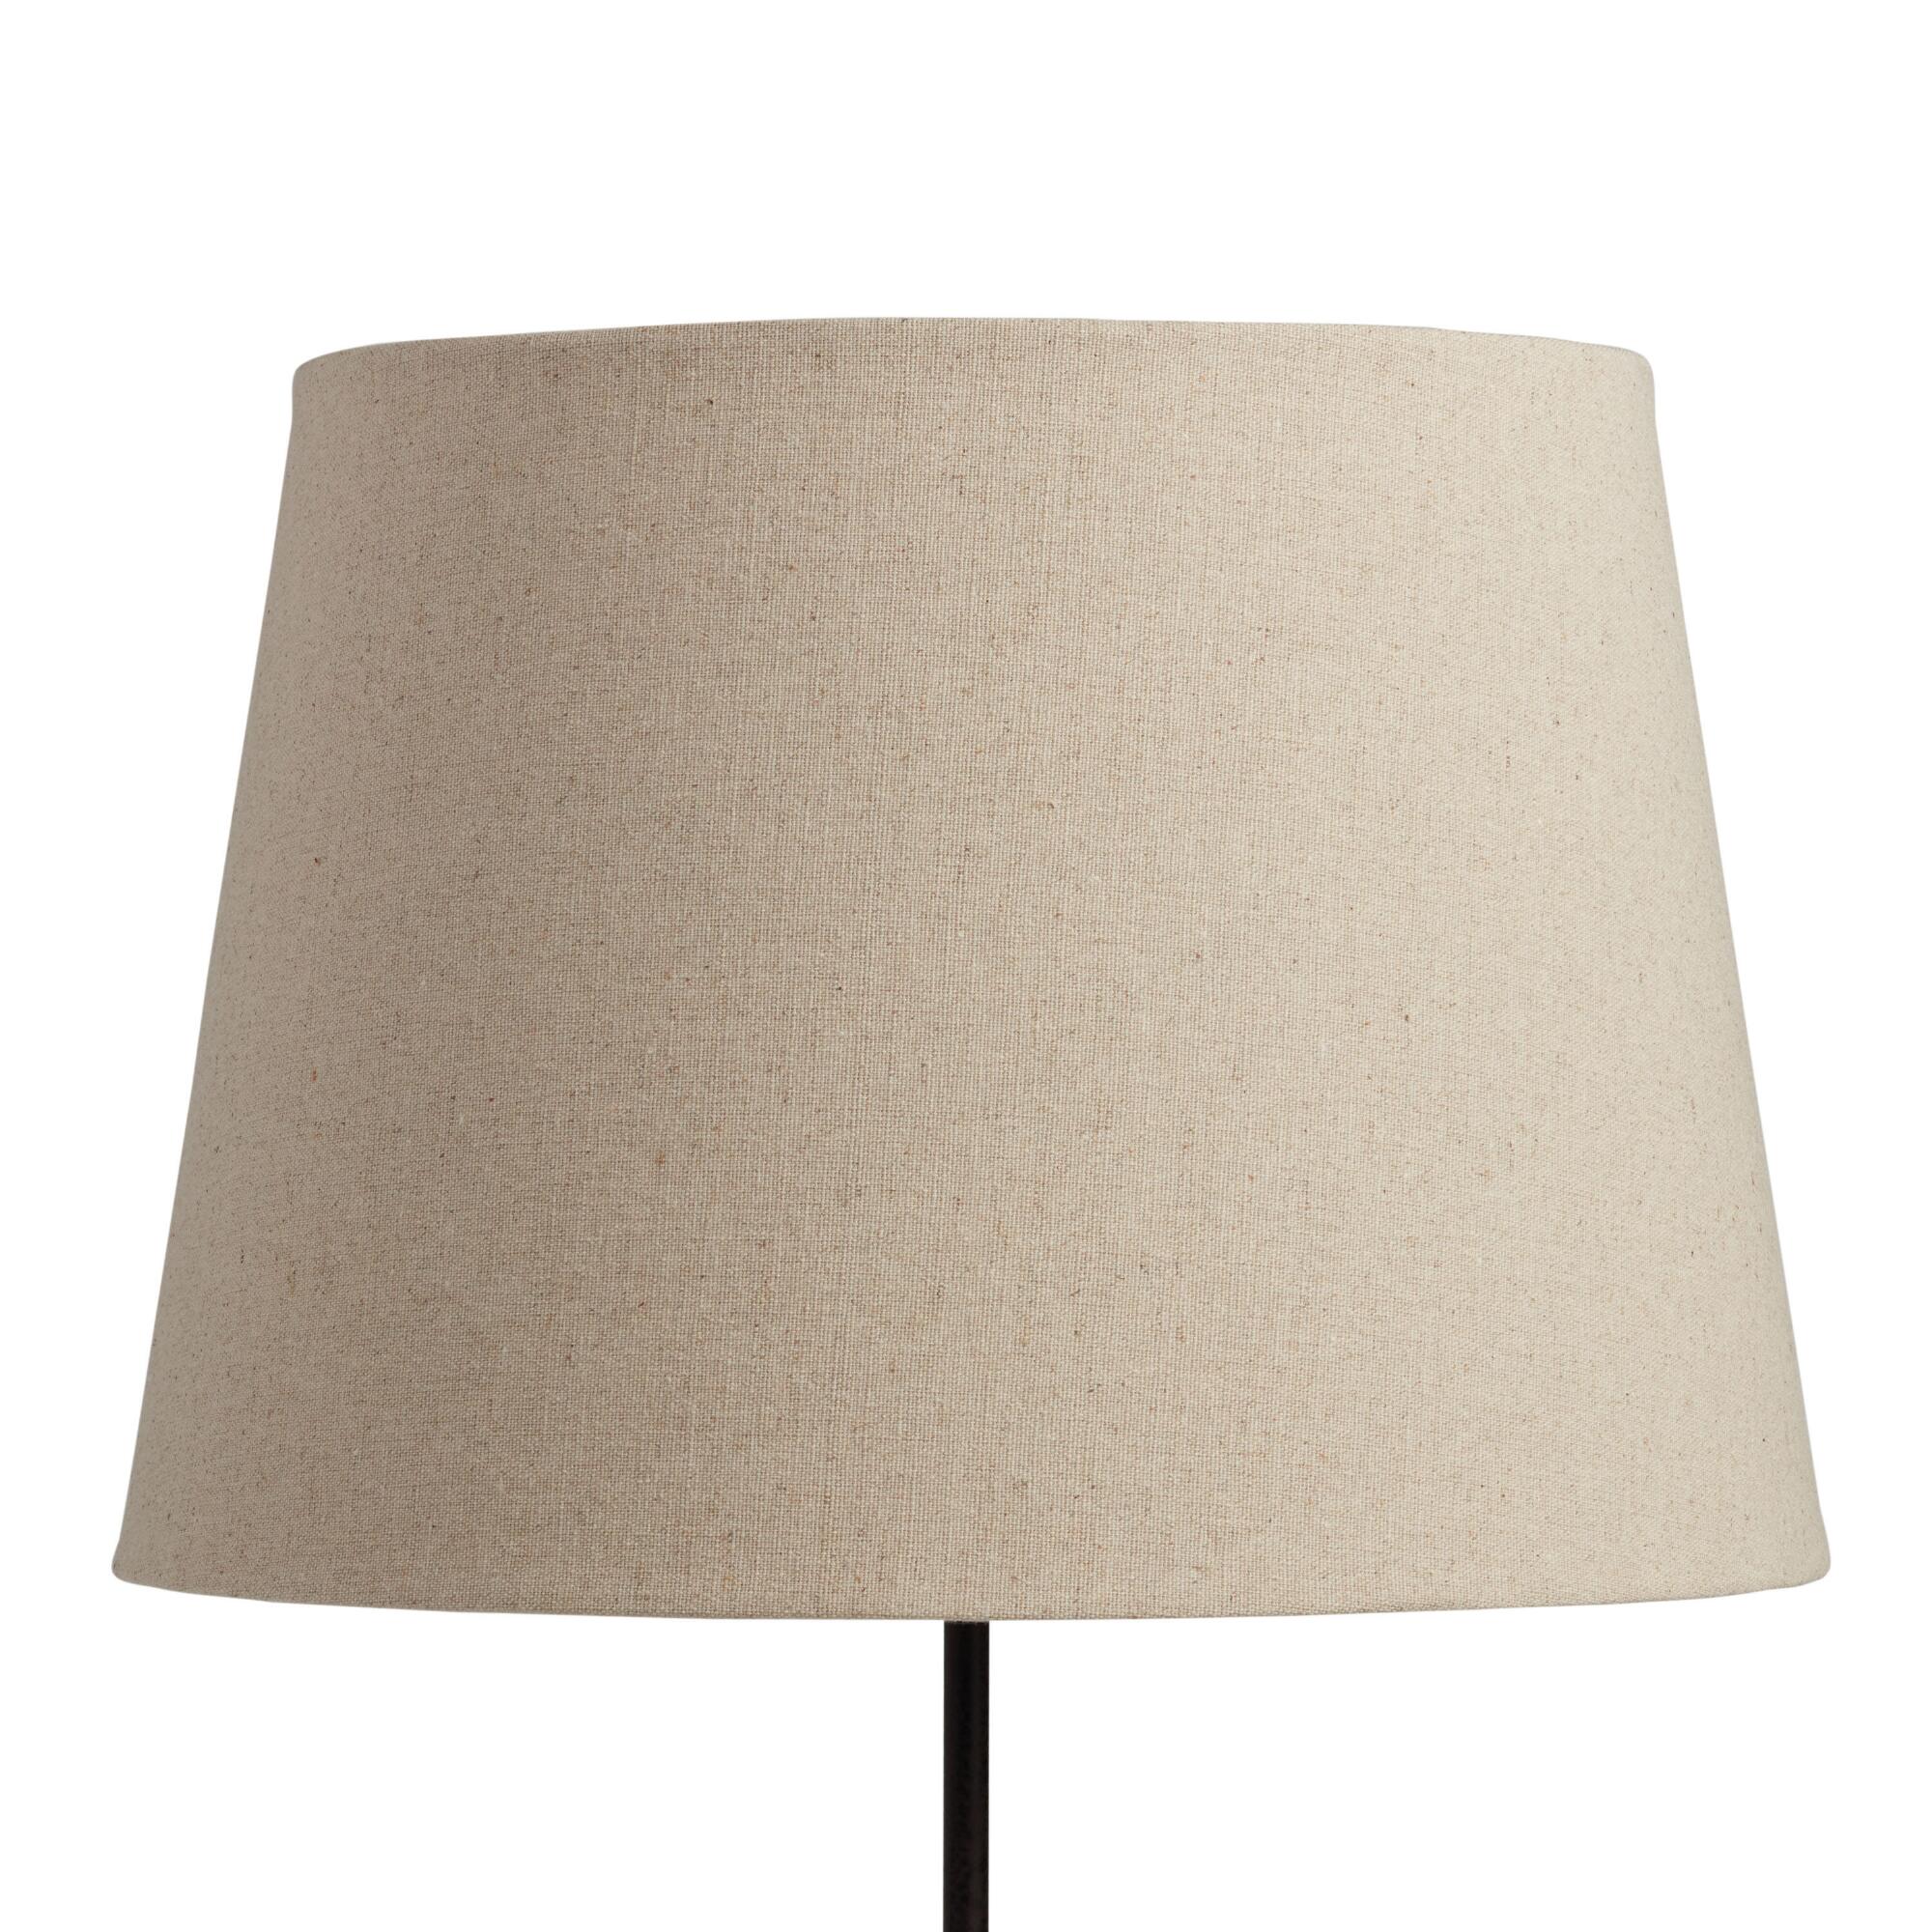 Natural Linen Table Lamp Shade - Fabric by World Market